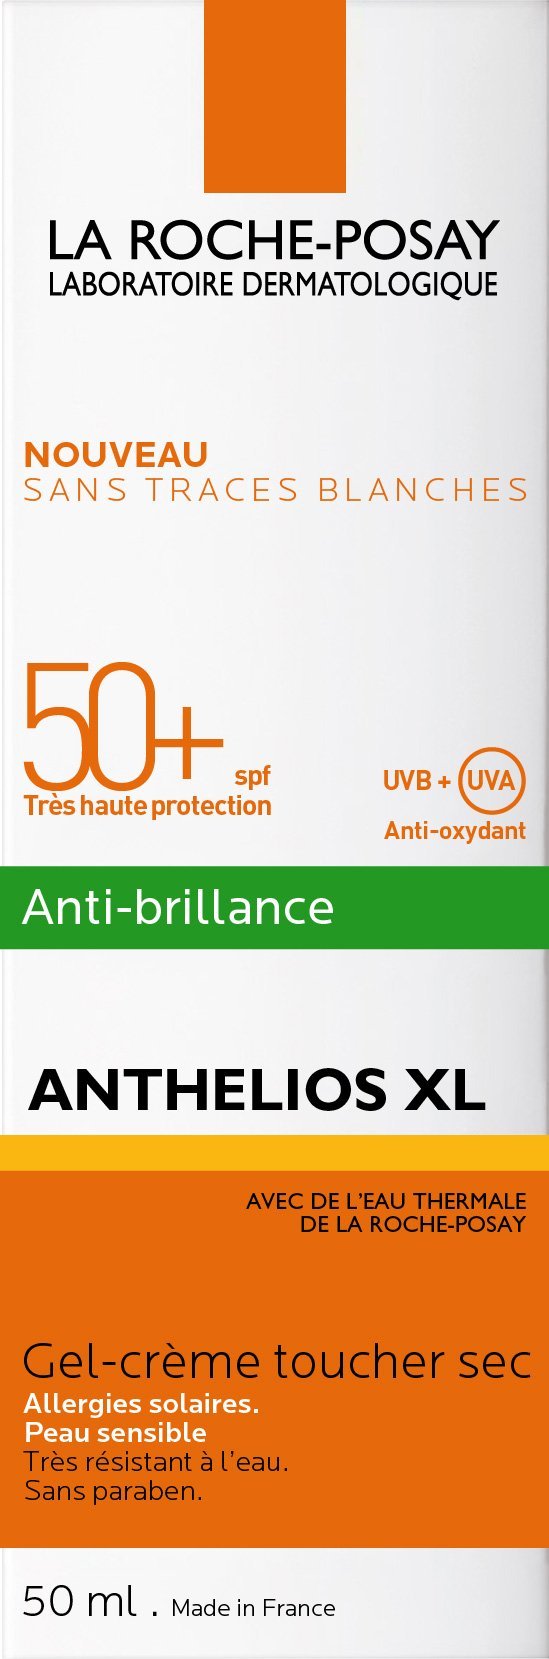 LRP Anthelios Dry Touch SPF50+ - SkinEffects Zwolle